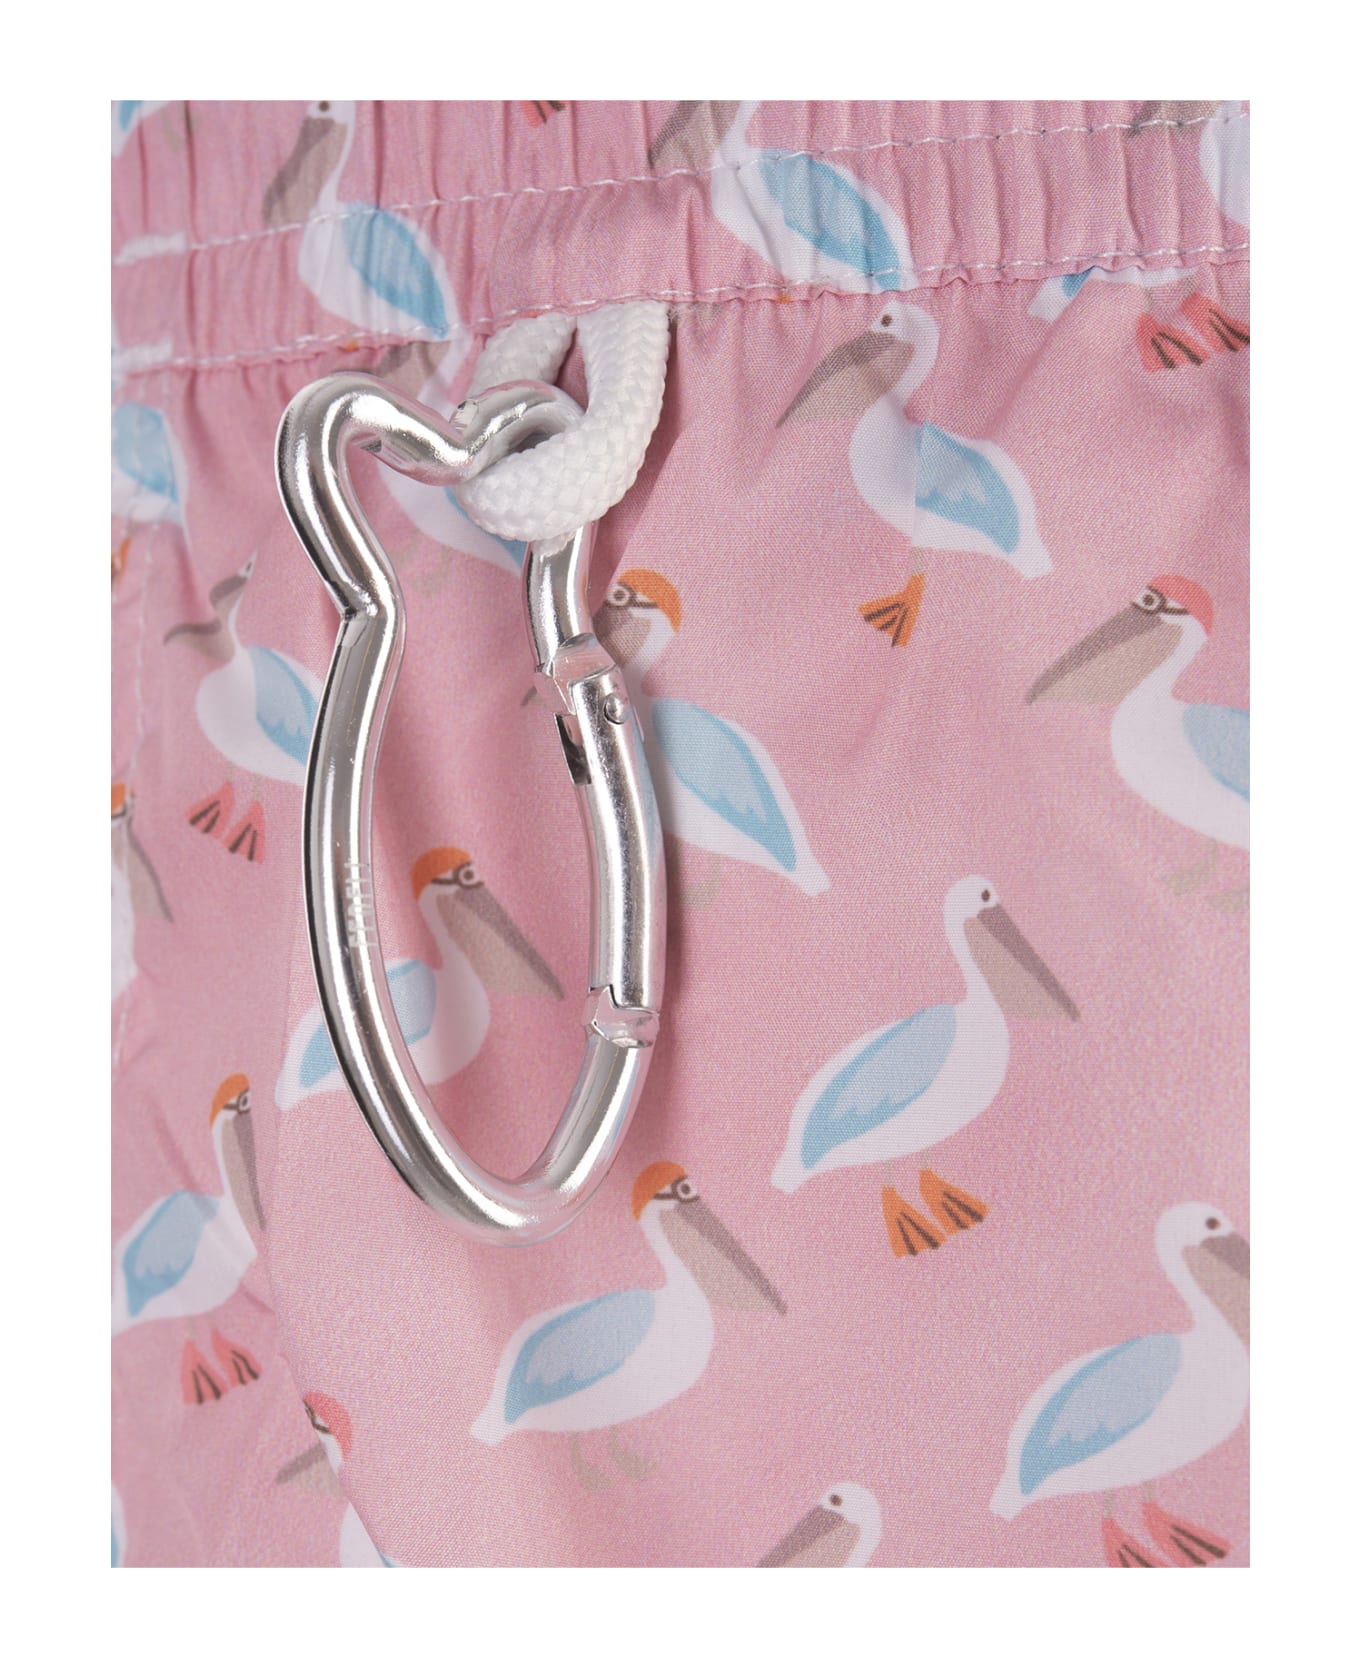 Fedeli Pink Swim Shorts With Pelican Pattern - Pink